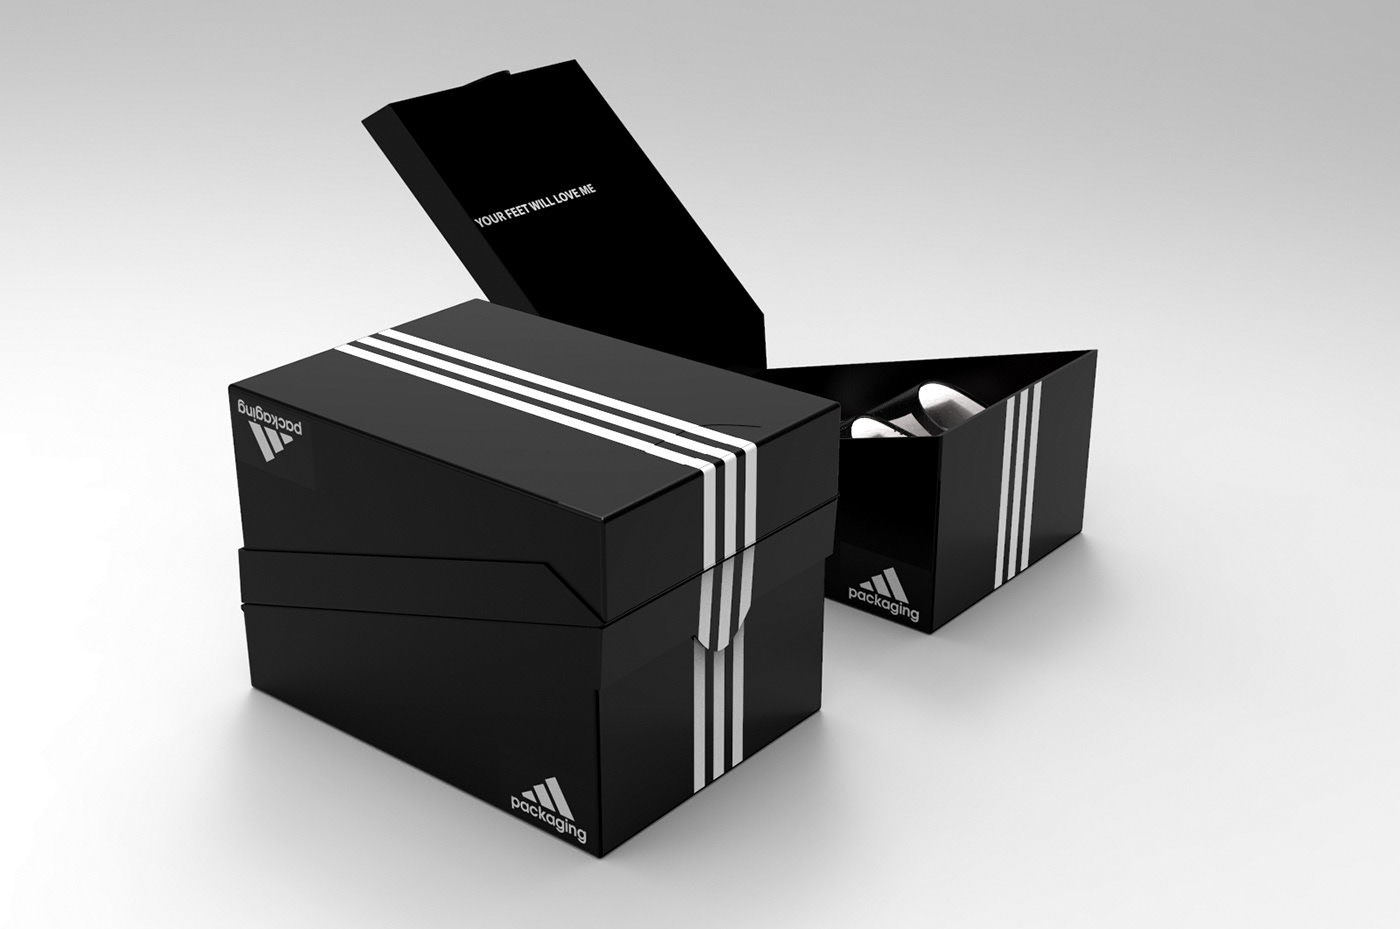 Asalto Marco de referencia Ajustable Packaging Design for Adidas Shoes on Behance